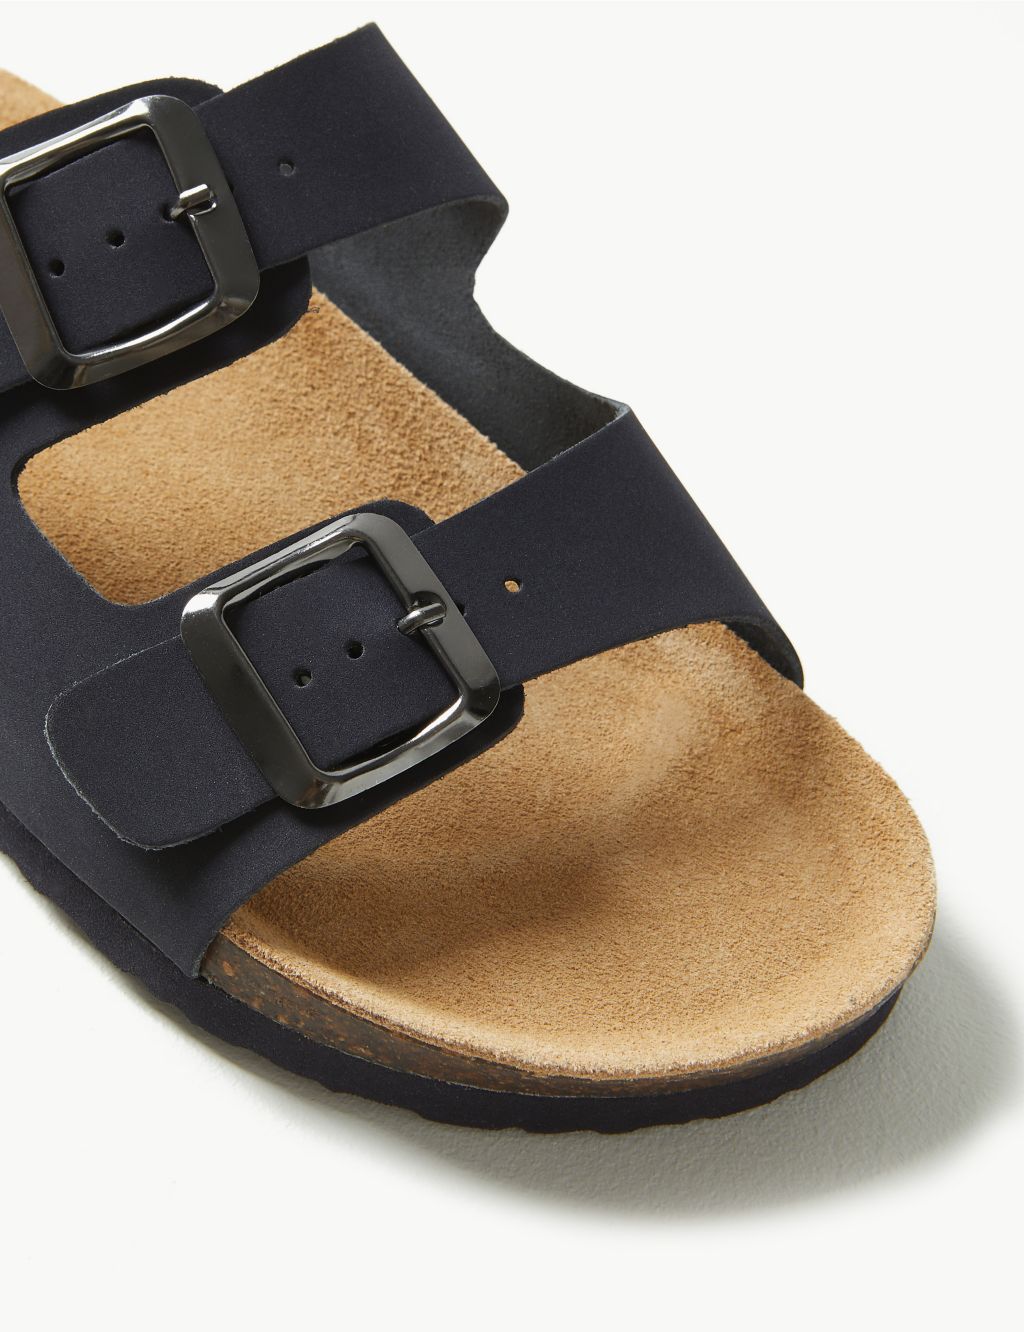 Leather Footbed Sandals image 4